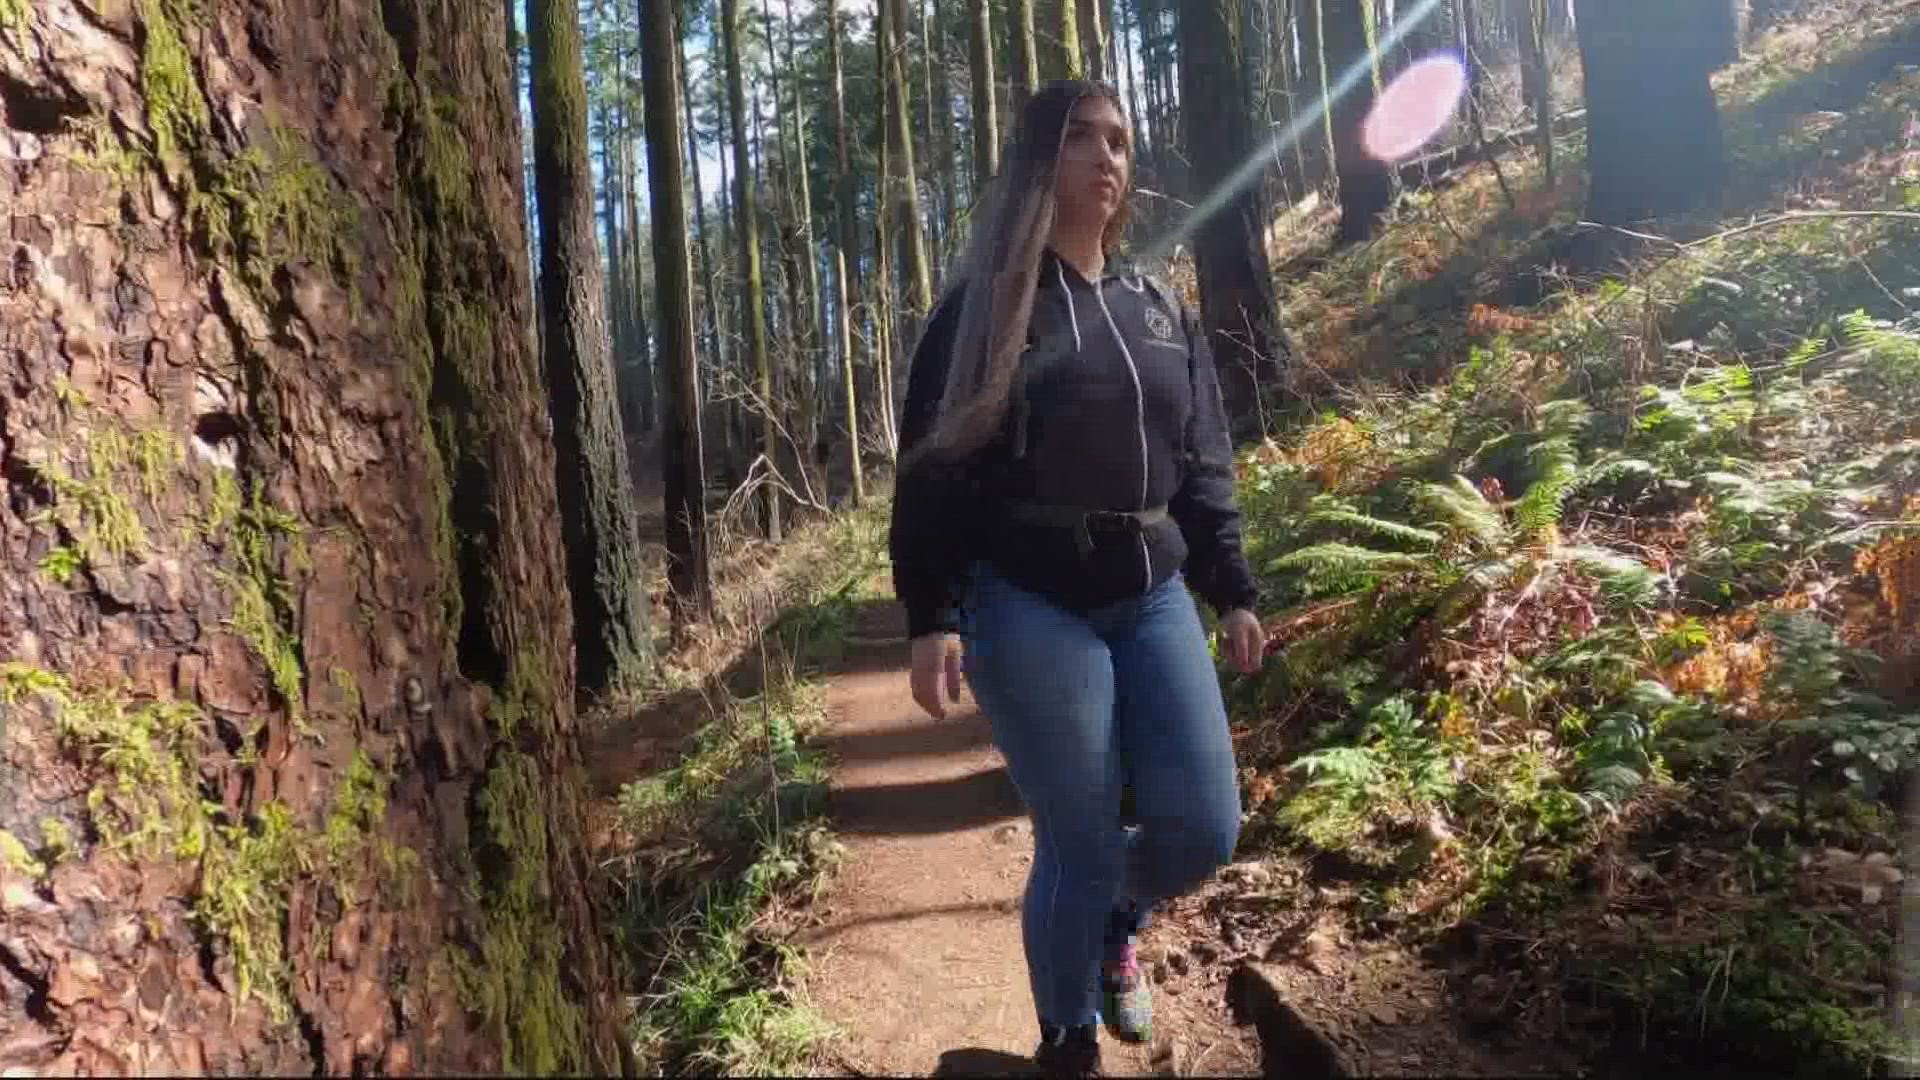 The Columbia River Gorge is one of the most scenic and popular hiking areas close to Portland. KGW's Jon Goodwin takes us there.